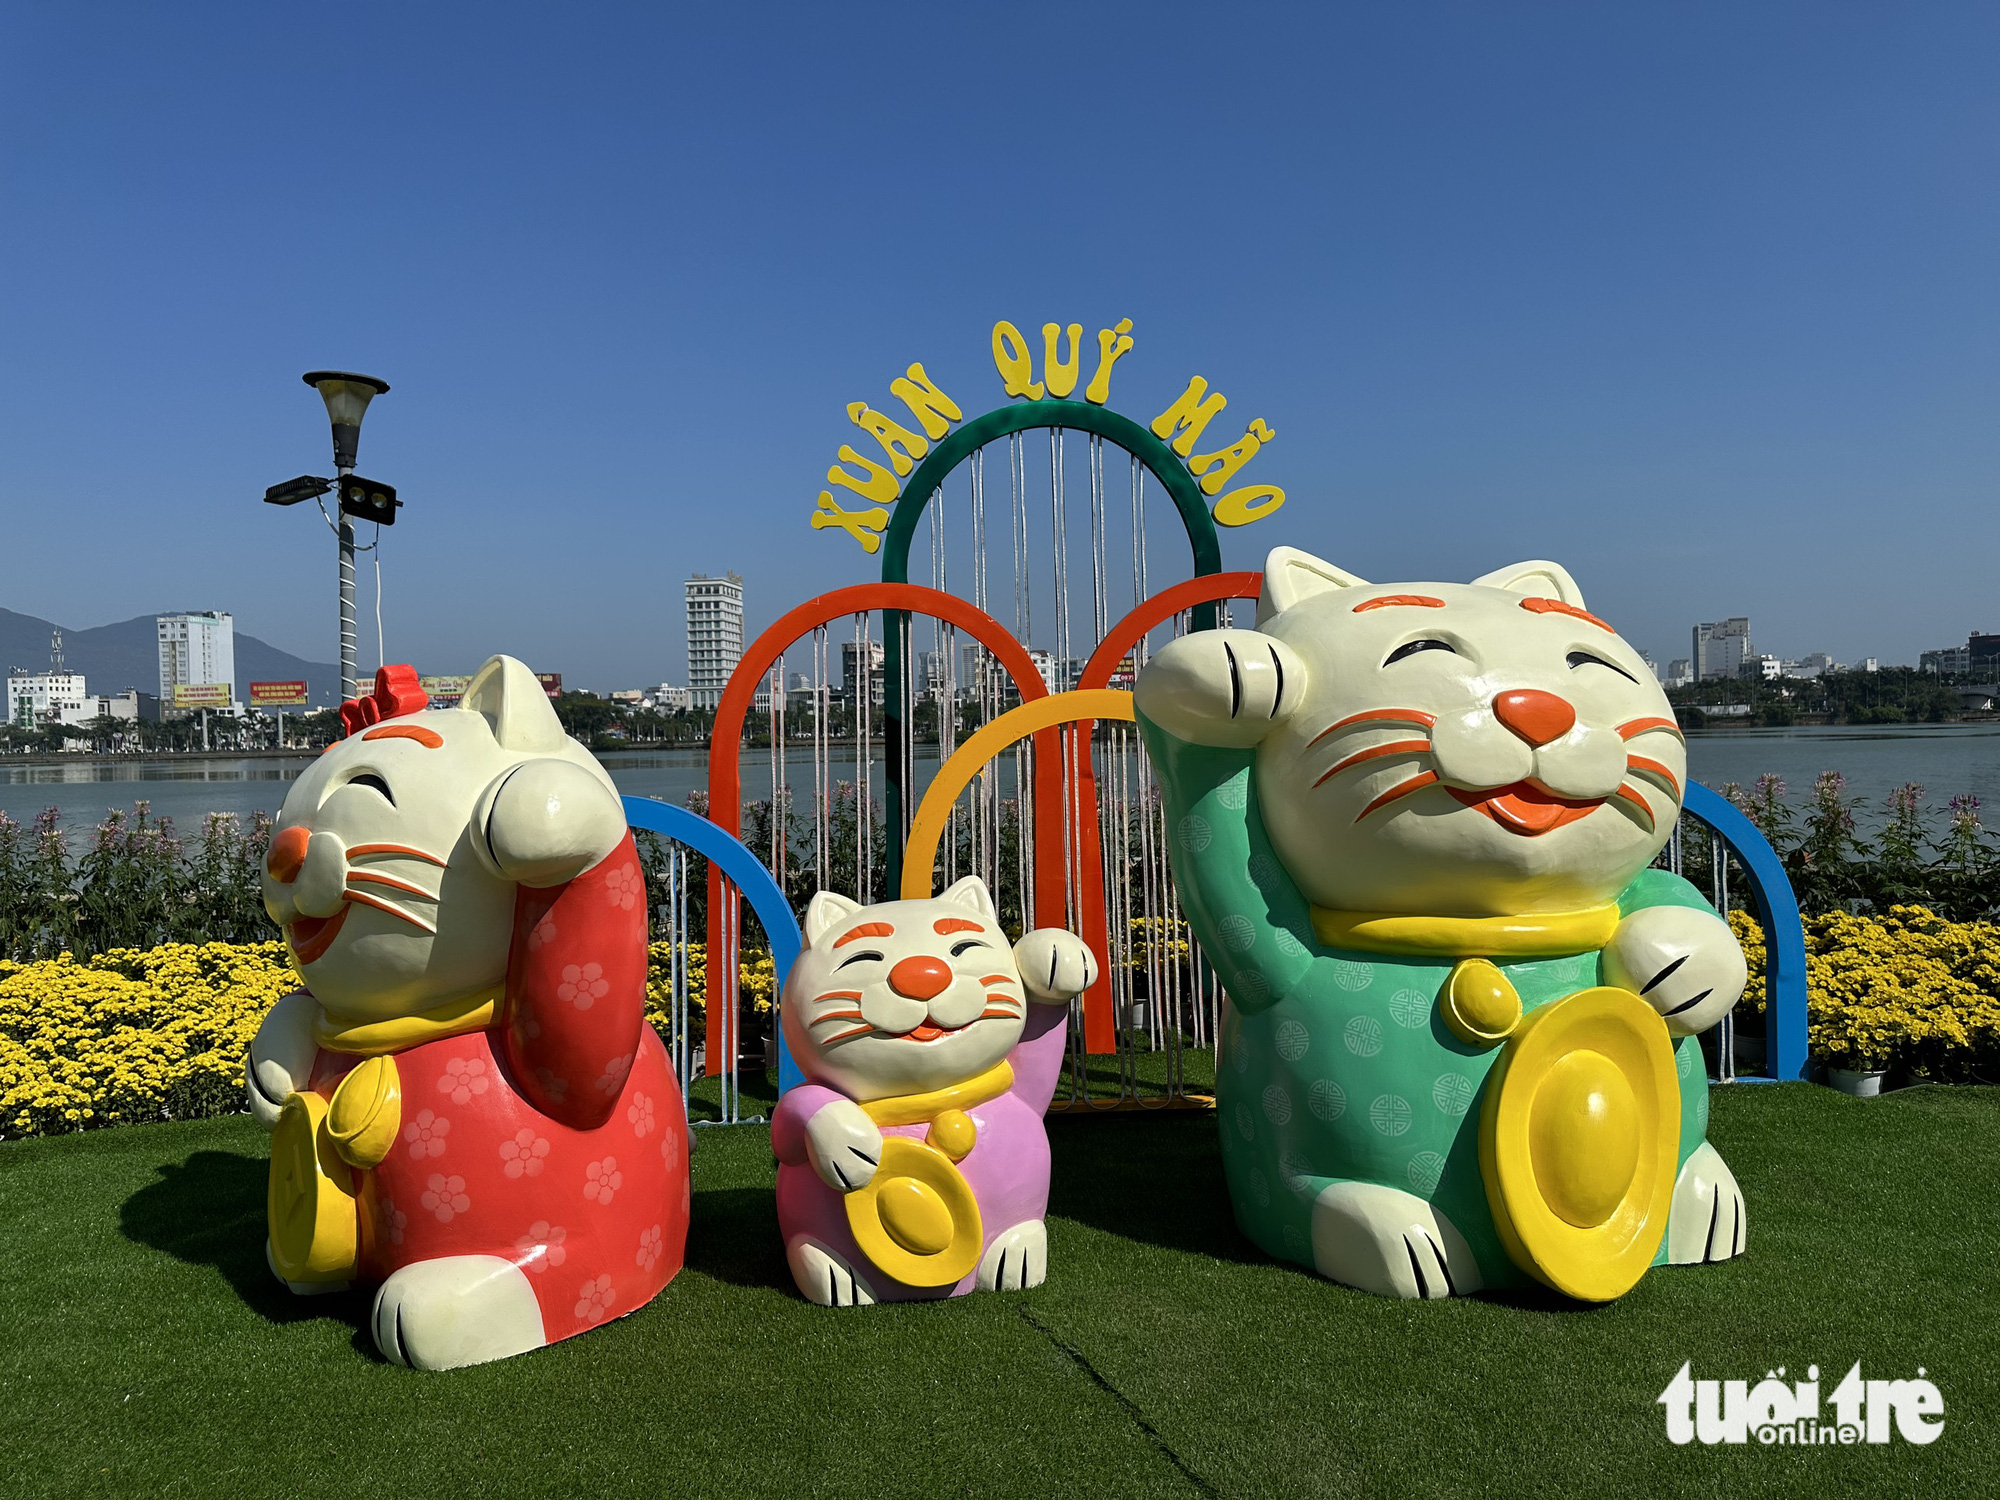 Statues of a cat family in traditional clothes with gold ingots on their hands. Photo: Moon Black / Tuoi Tre